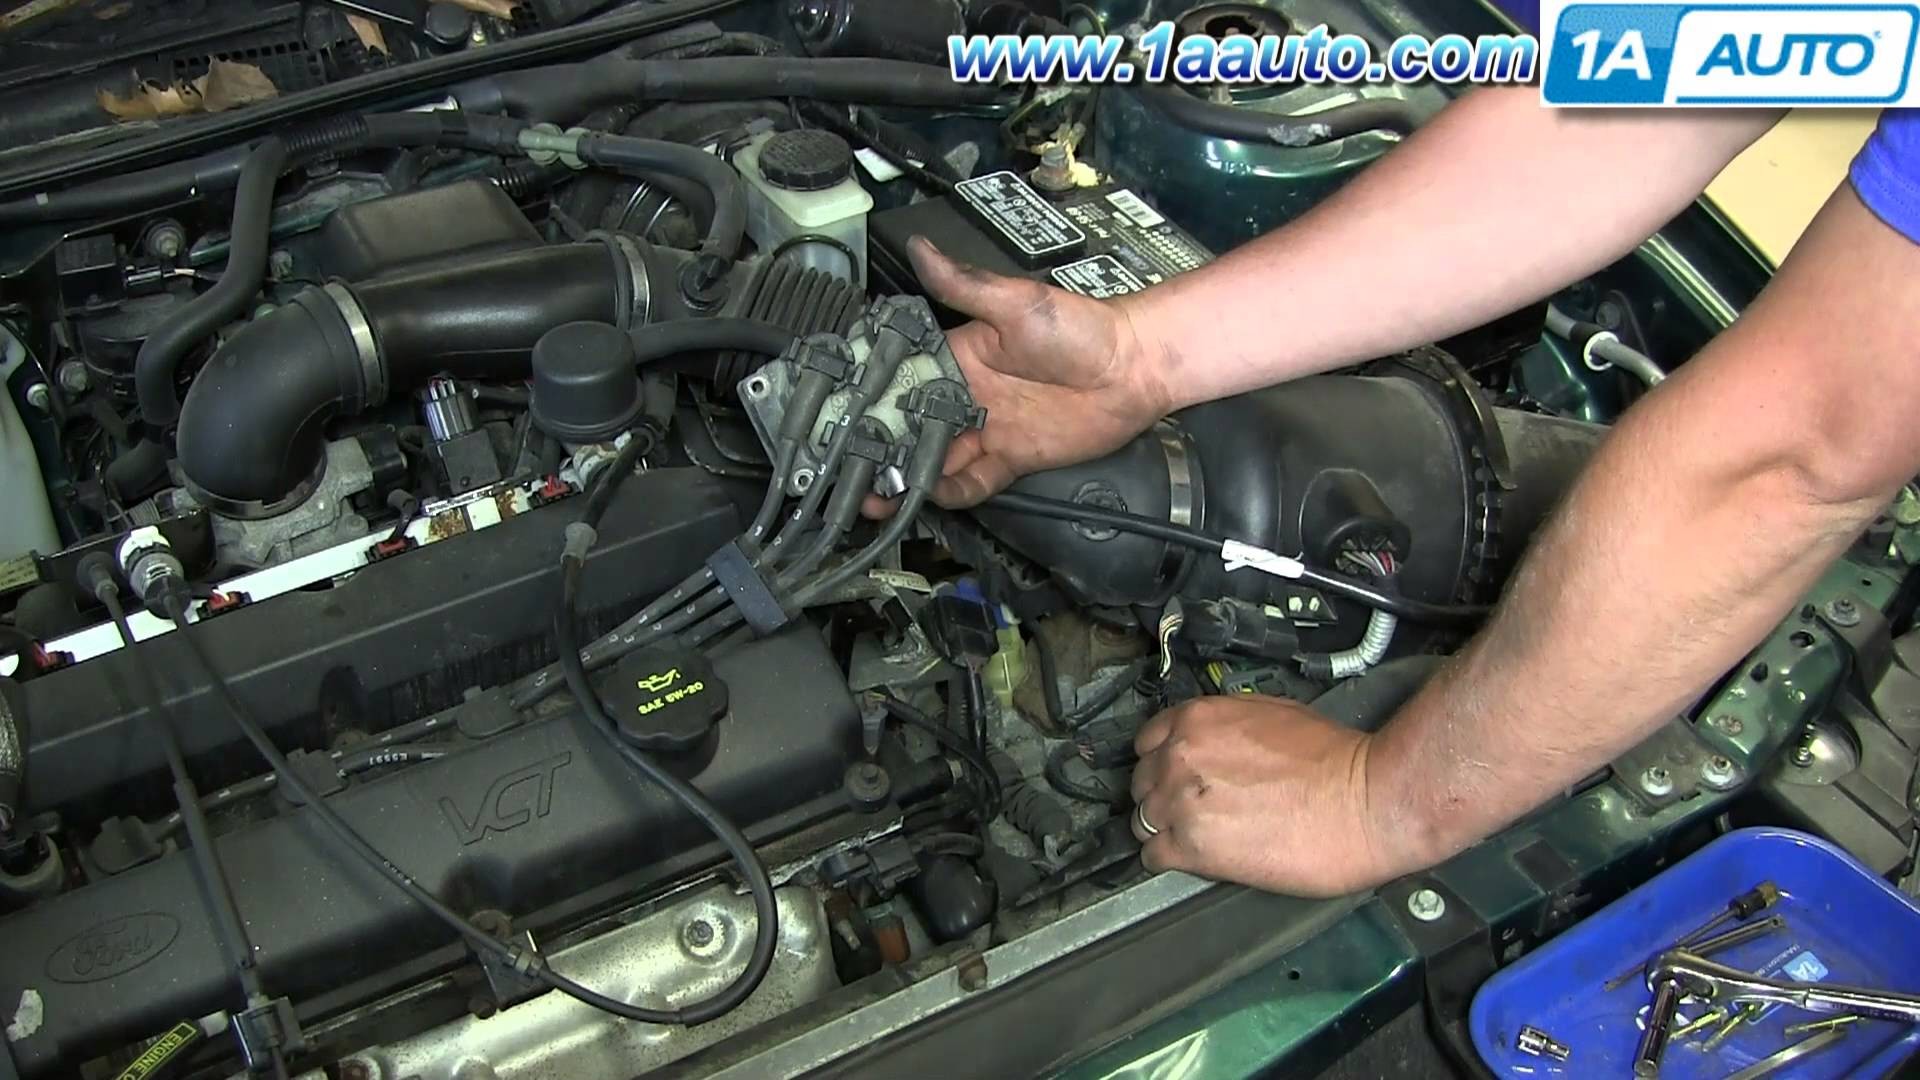 97 ford Escort Engine Diagram How to Replace Fix Engine Ignition Coil 1998 03 ford Escort Zx2 2 0l